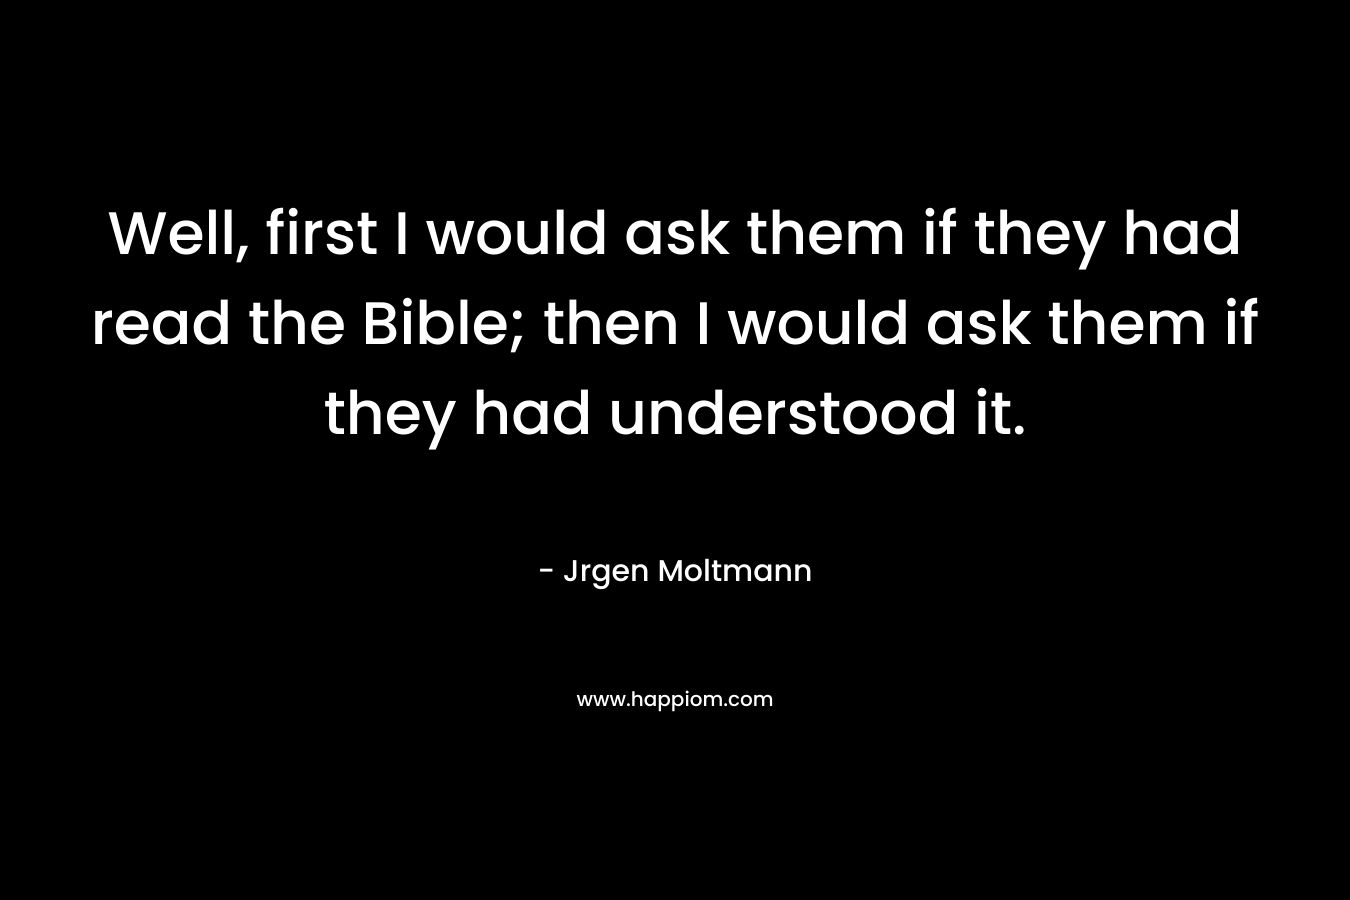 Well, first I would ask them if they had read the Bible; then I would ask them if they had understood it. – Jrgen Moltmann